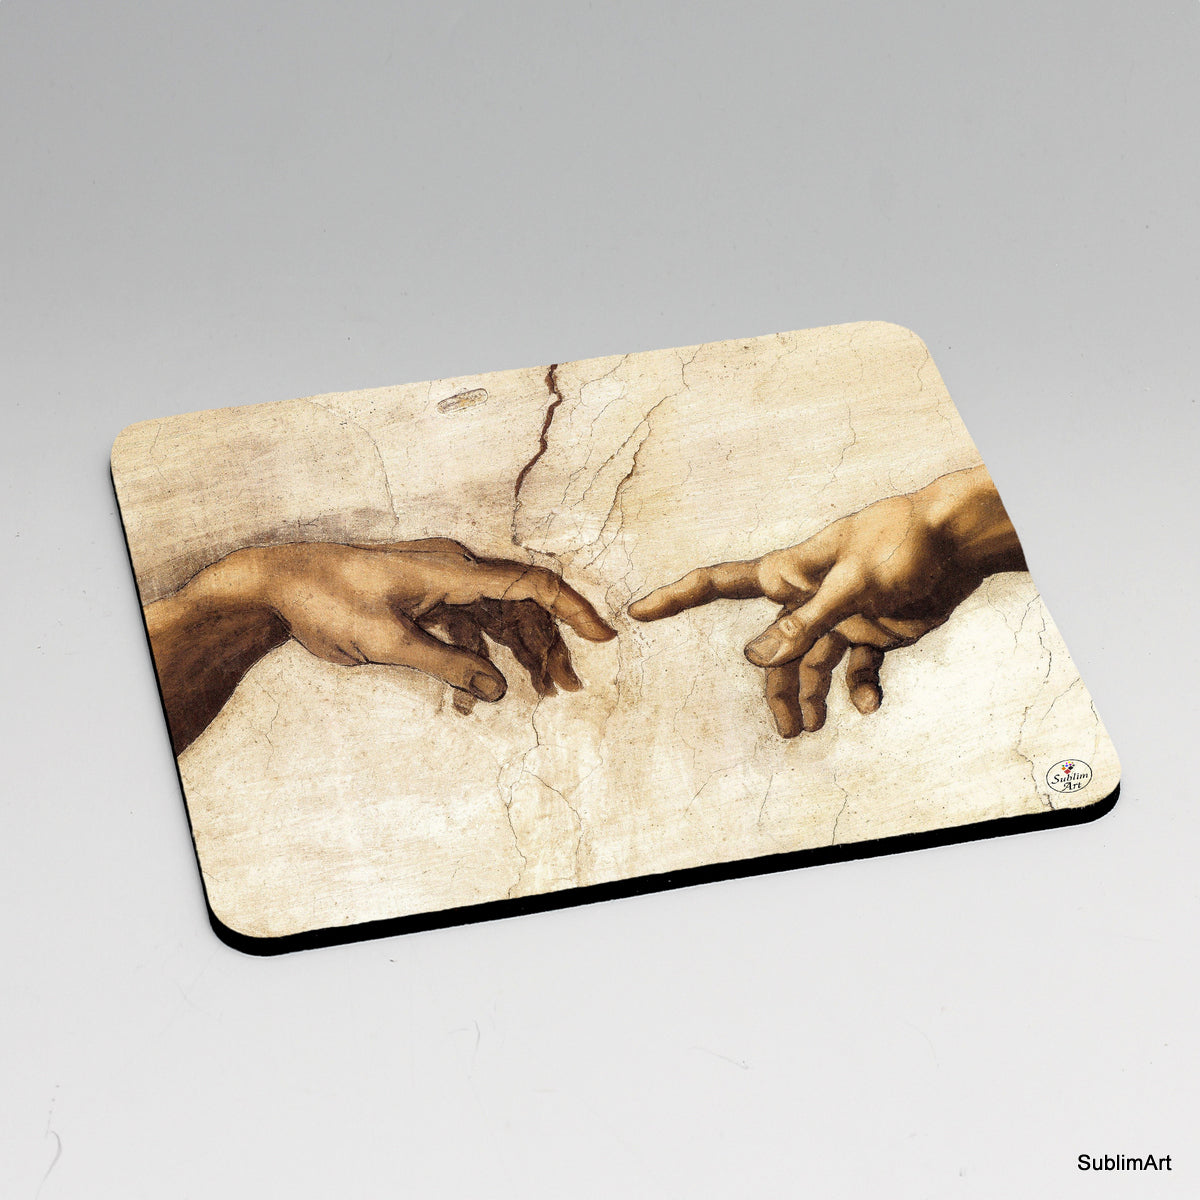 MOUSE PAD: Design Creation of Adam detail by Michelangelo